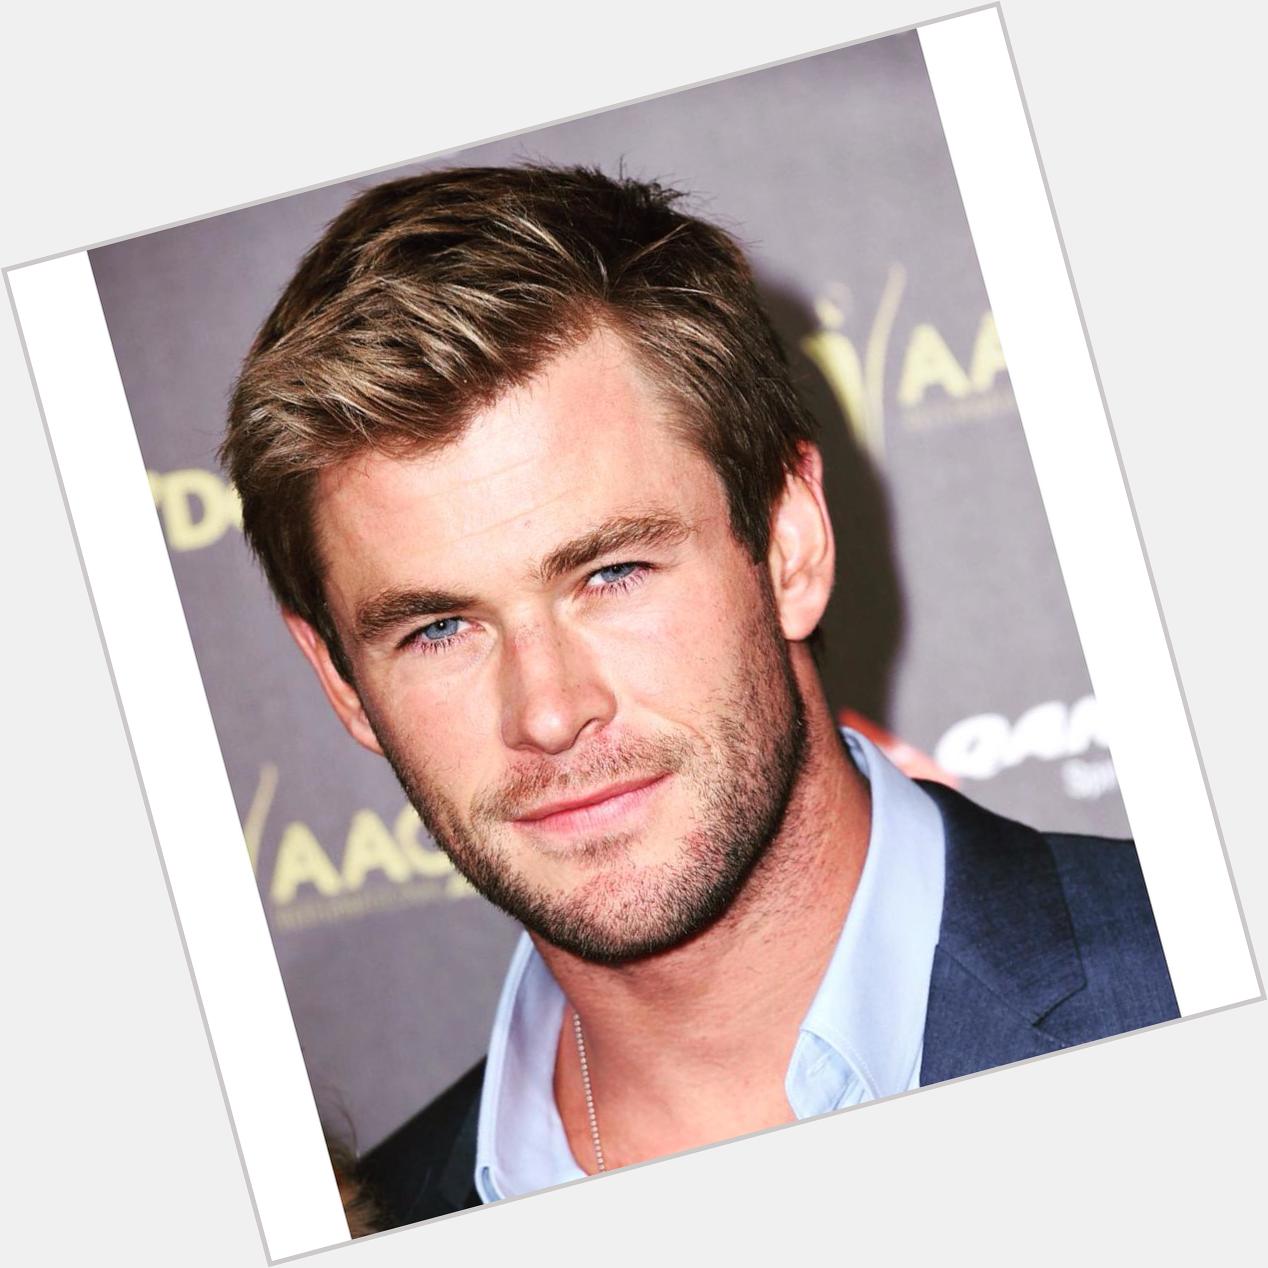 Happy 32nd birthday to Chris Hemsworth! TRUTH Magazine wishes you all the best.  